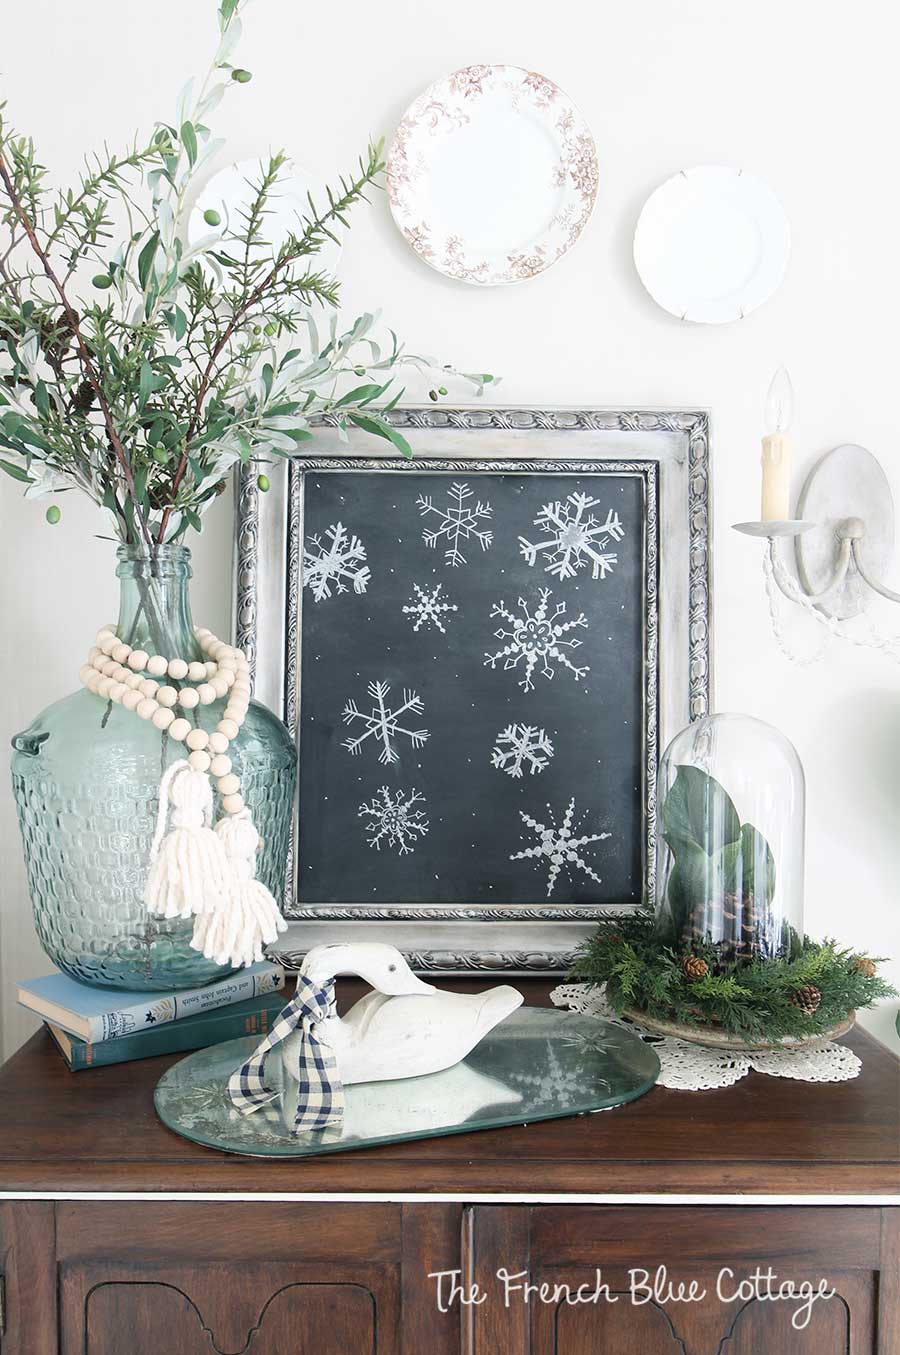 Winter vignette with wood beads and chalkboard snowflakes.